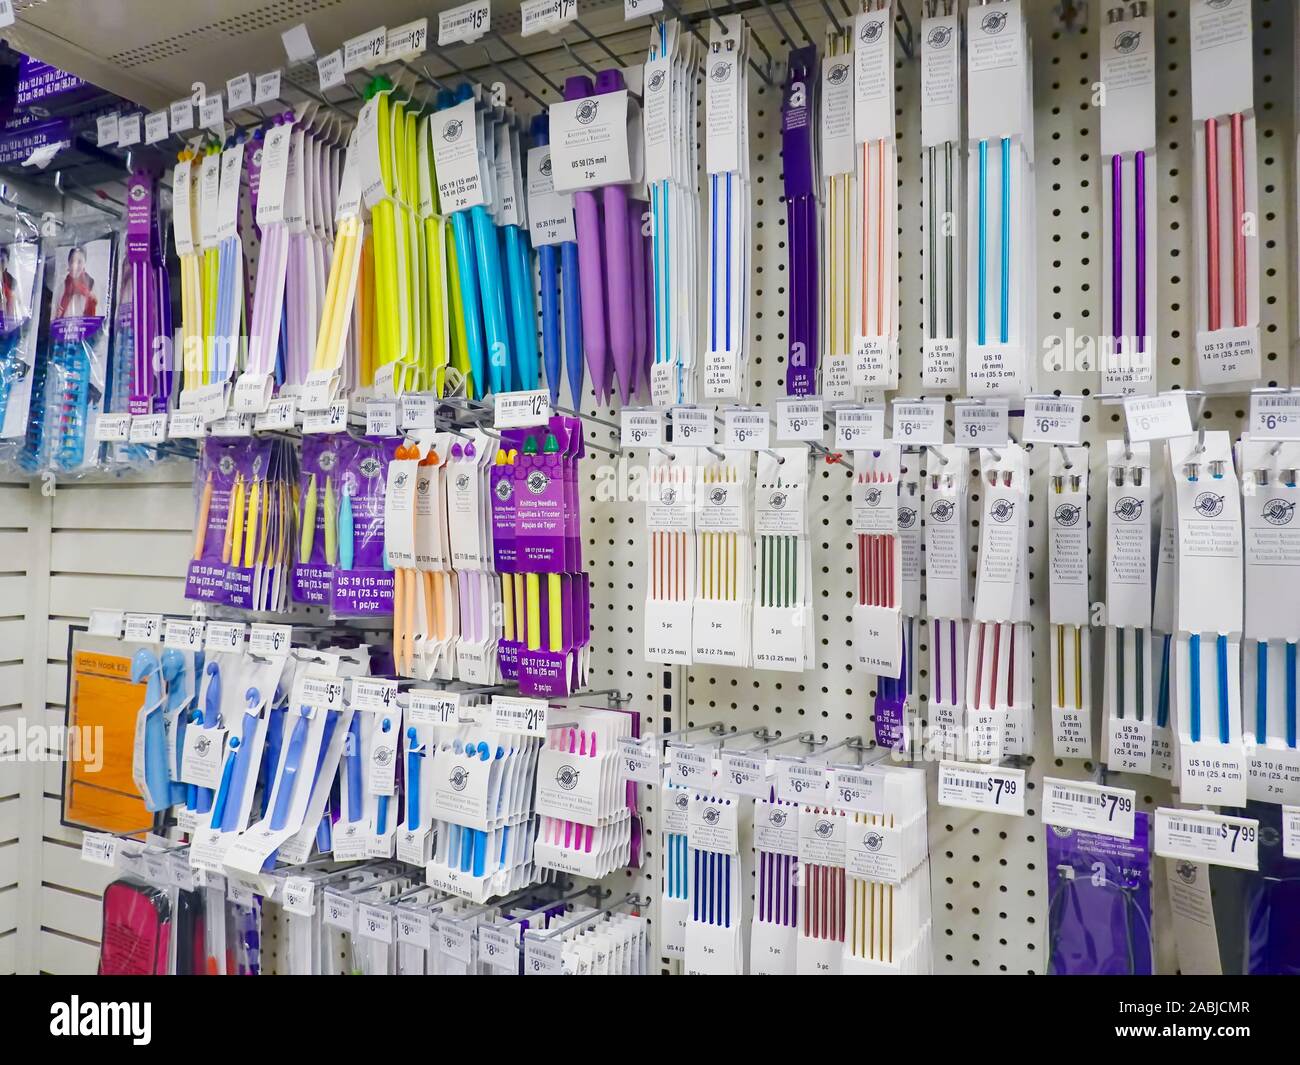 Knitting Needles and Crochet Hooks on Display in a Craft Store. Stock Photo